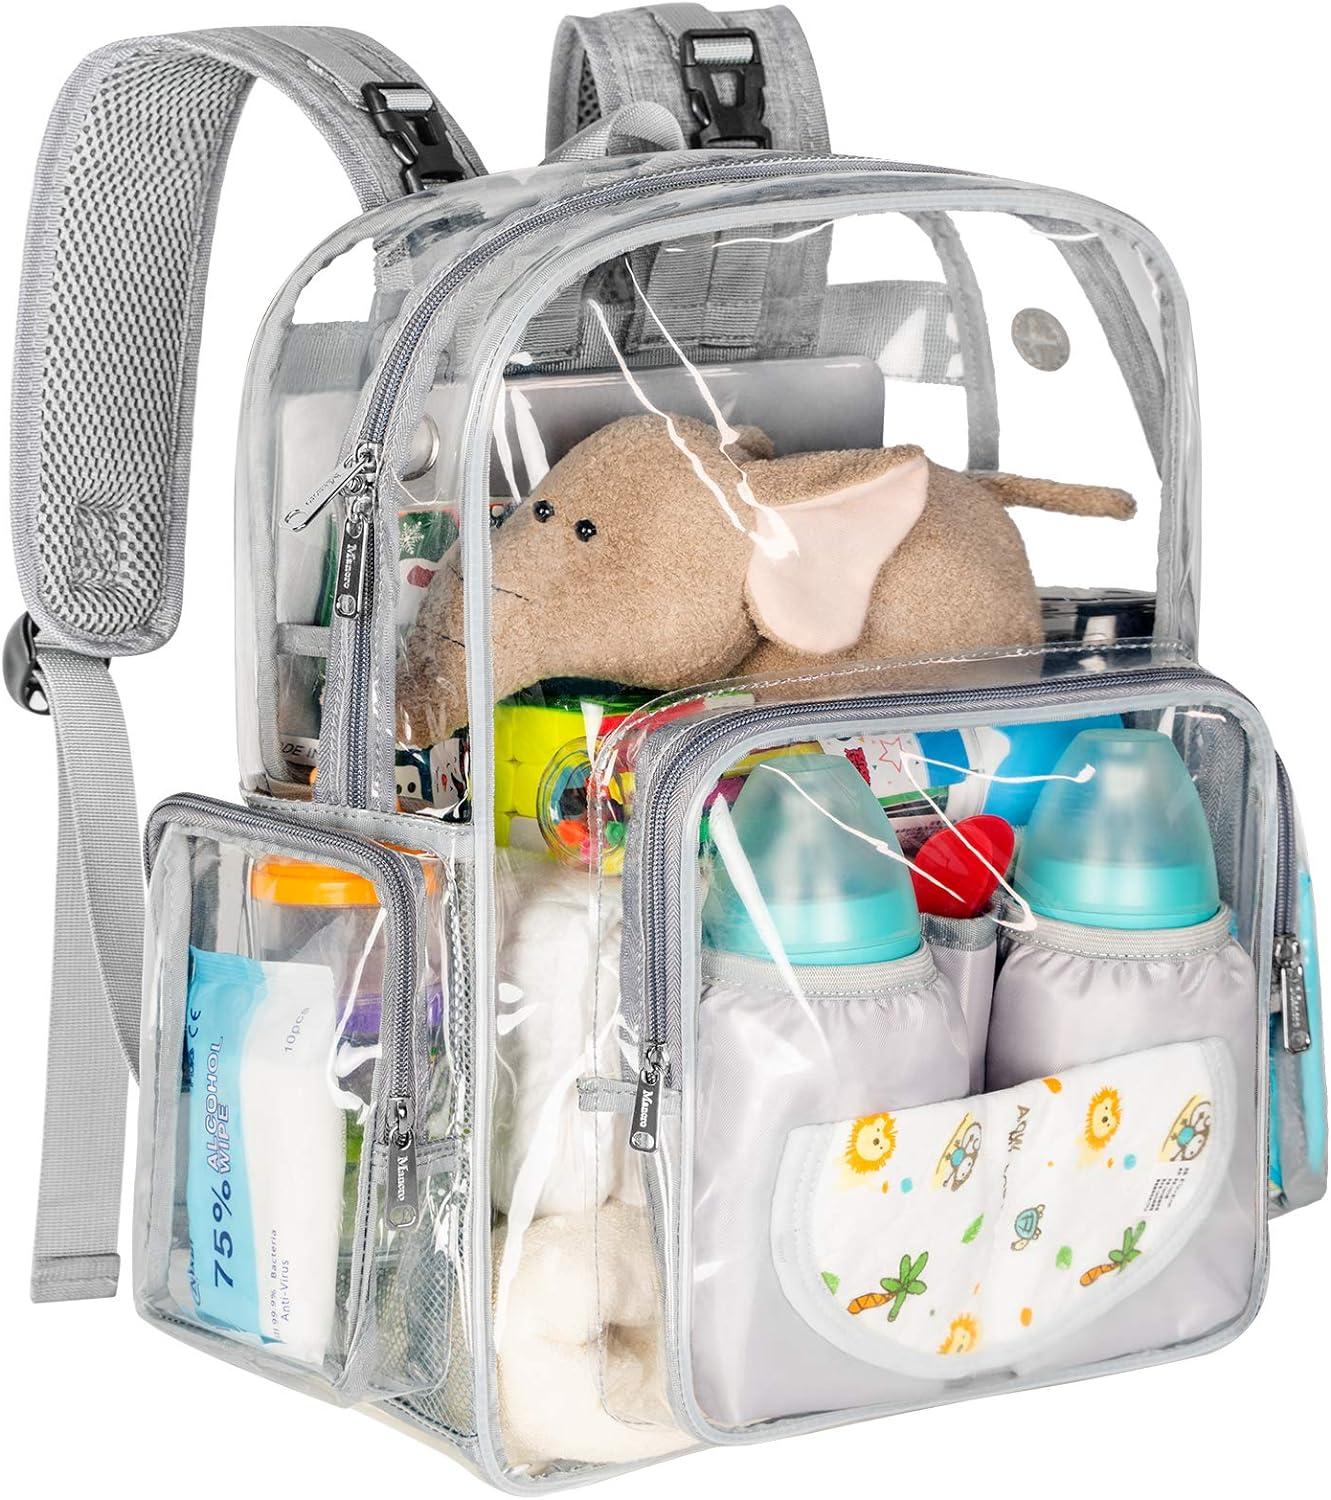 I've had clear diaper bags before, this one isn't my favorite because i wish it was a big rectangle (with i couldn't find on Amazon) however, it is a softer plastic and not as stiff as some bags. The amount of pockets is great. Quality is good. I like that it has the ability to snap into my stroller, cause i wouldn't be able to fit it in the bottom of the stroller. The back pack function with easy resizing is very convenient as well.